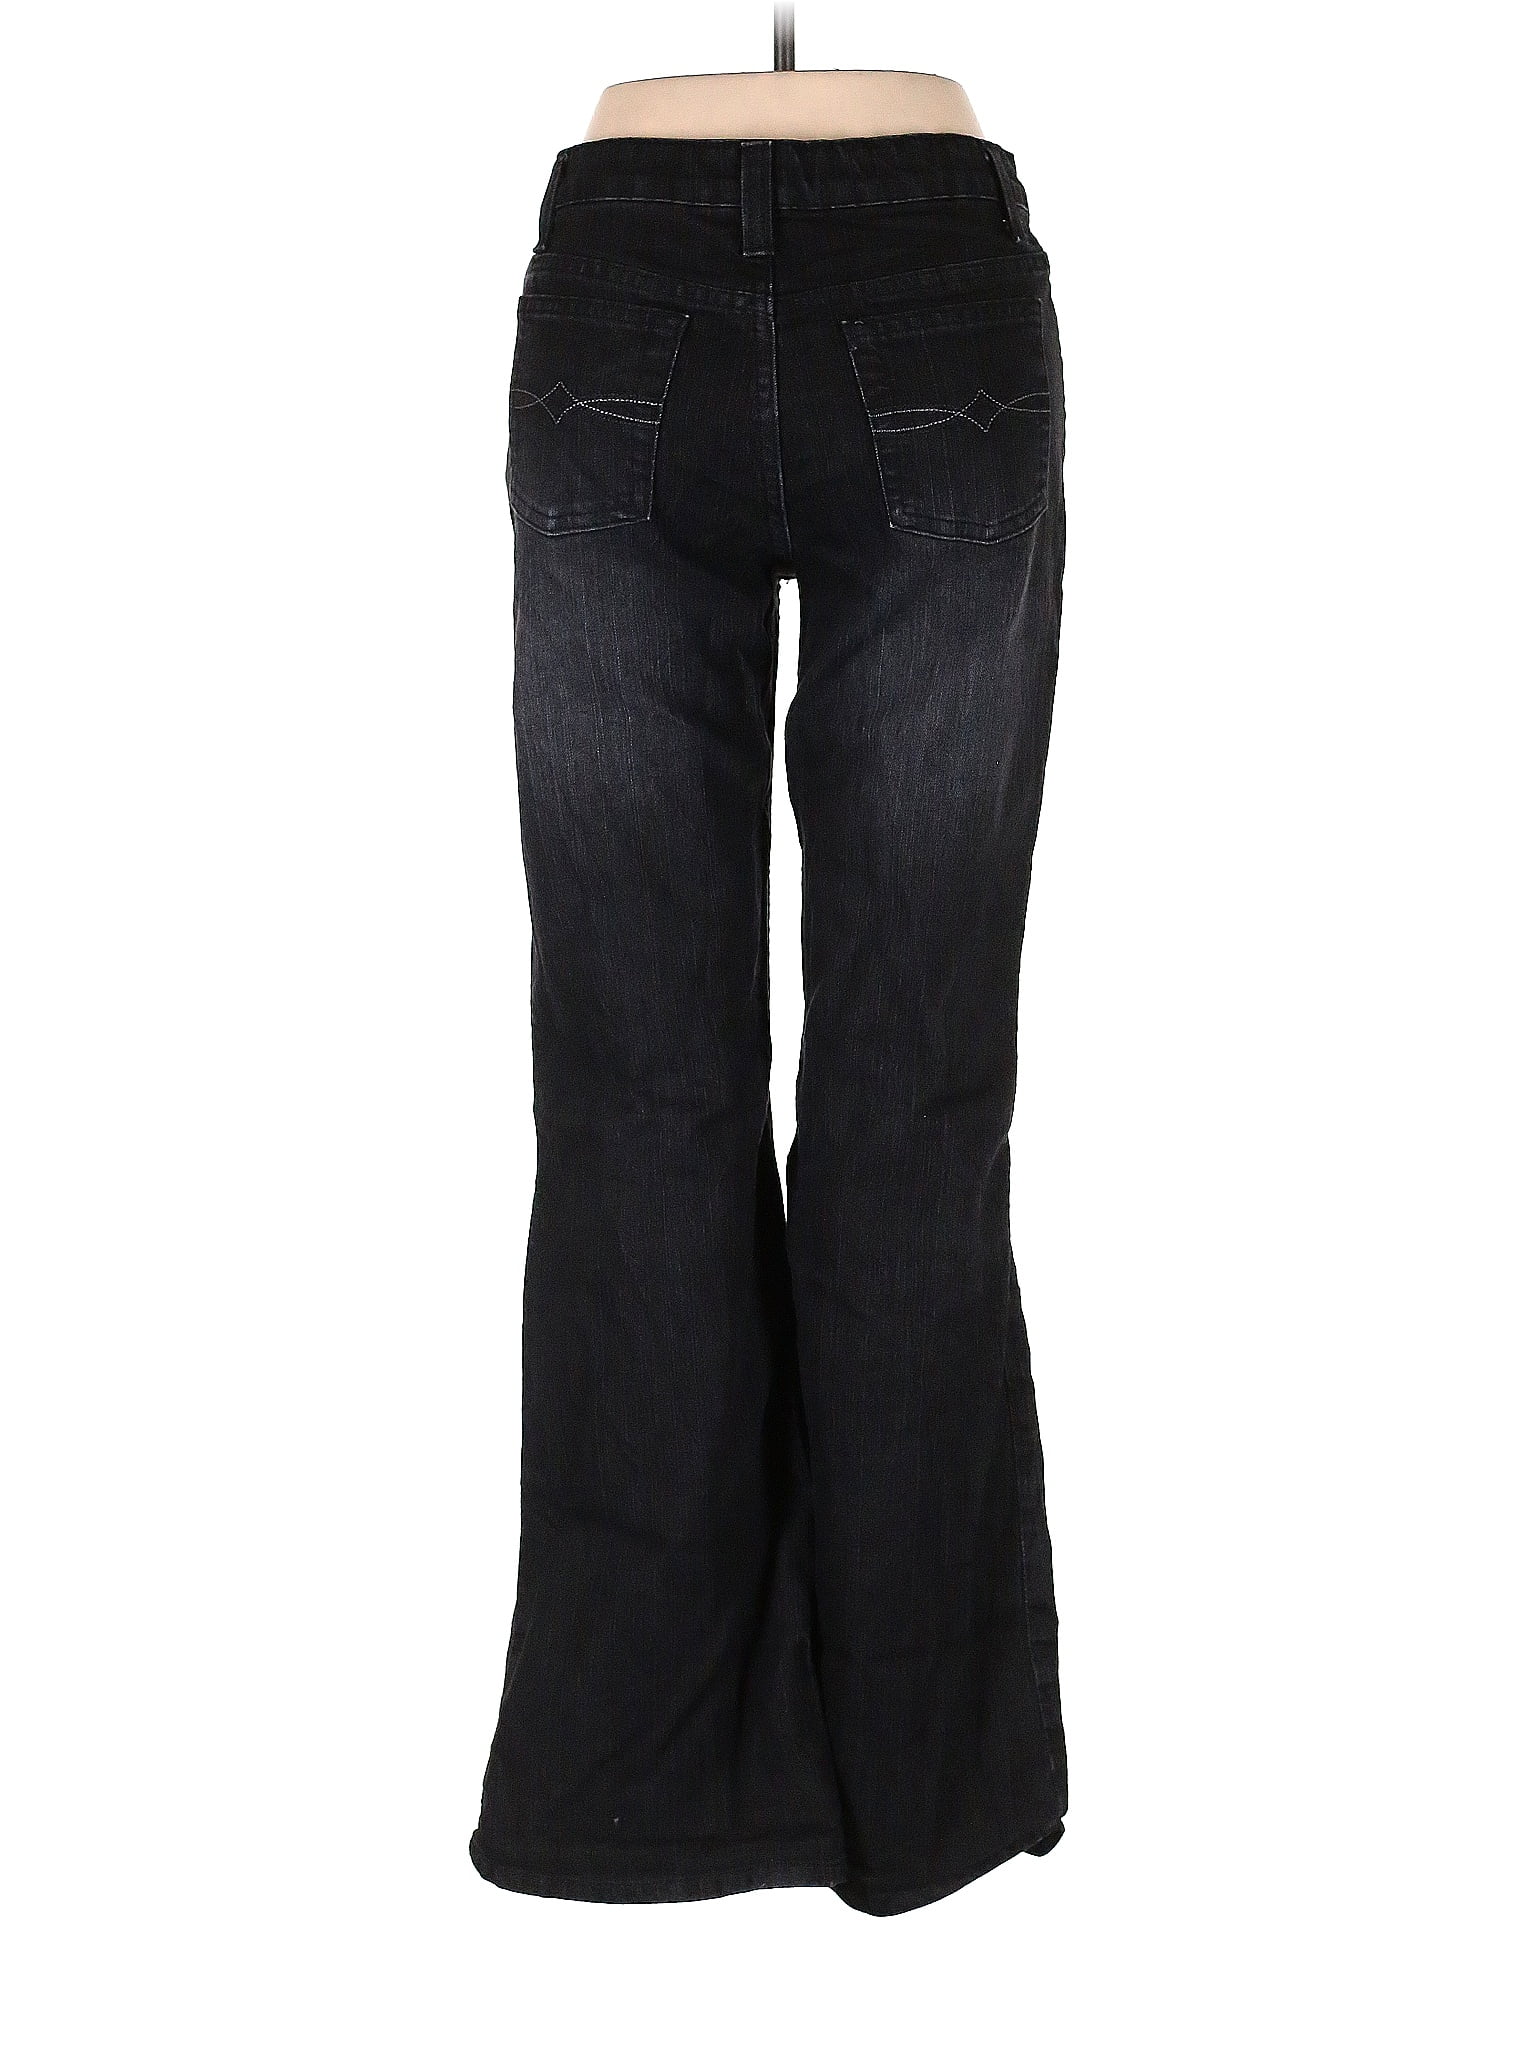 Faded Glory Black Jeans Size 8 - 56% off